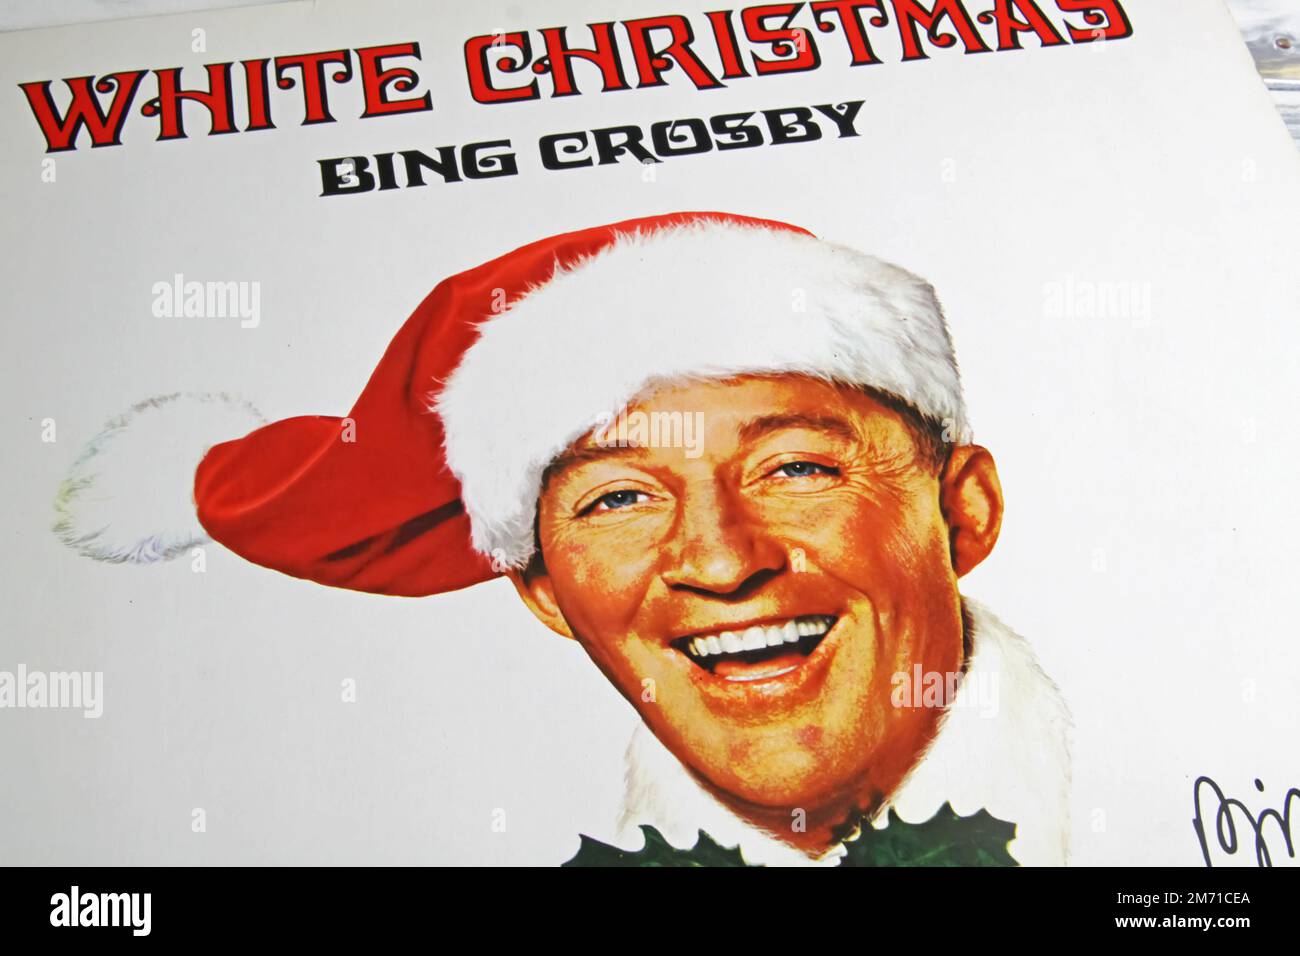 Viersen, Germany - May 9. 2022: Closeup of vinyl record cover Bing Crosby white christmas song Stock Photo